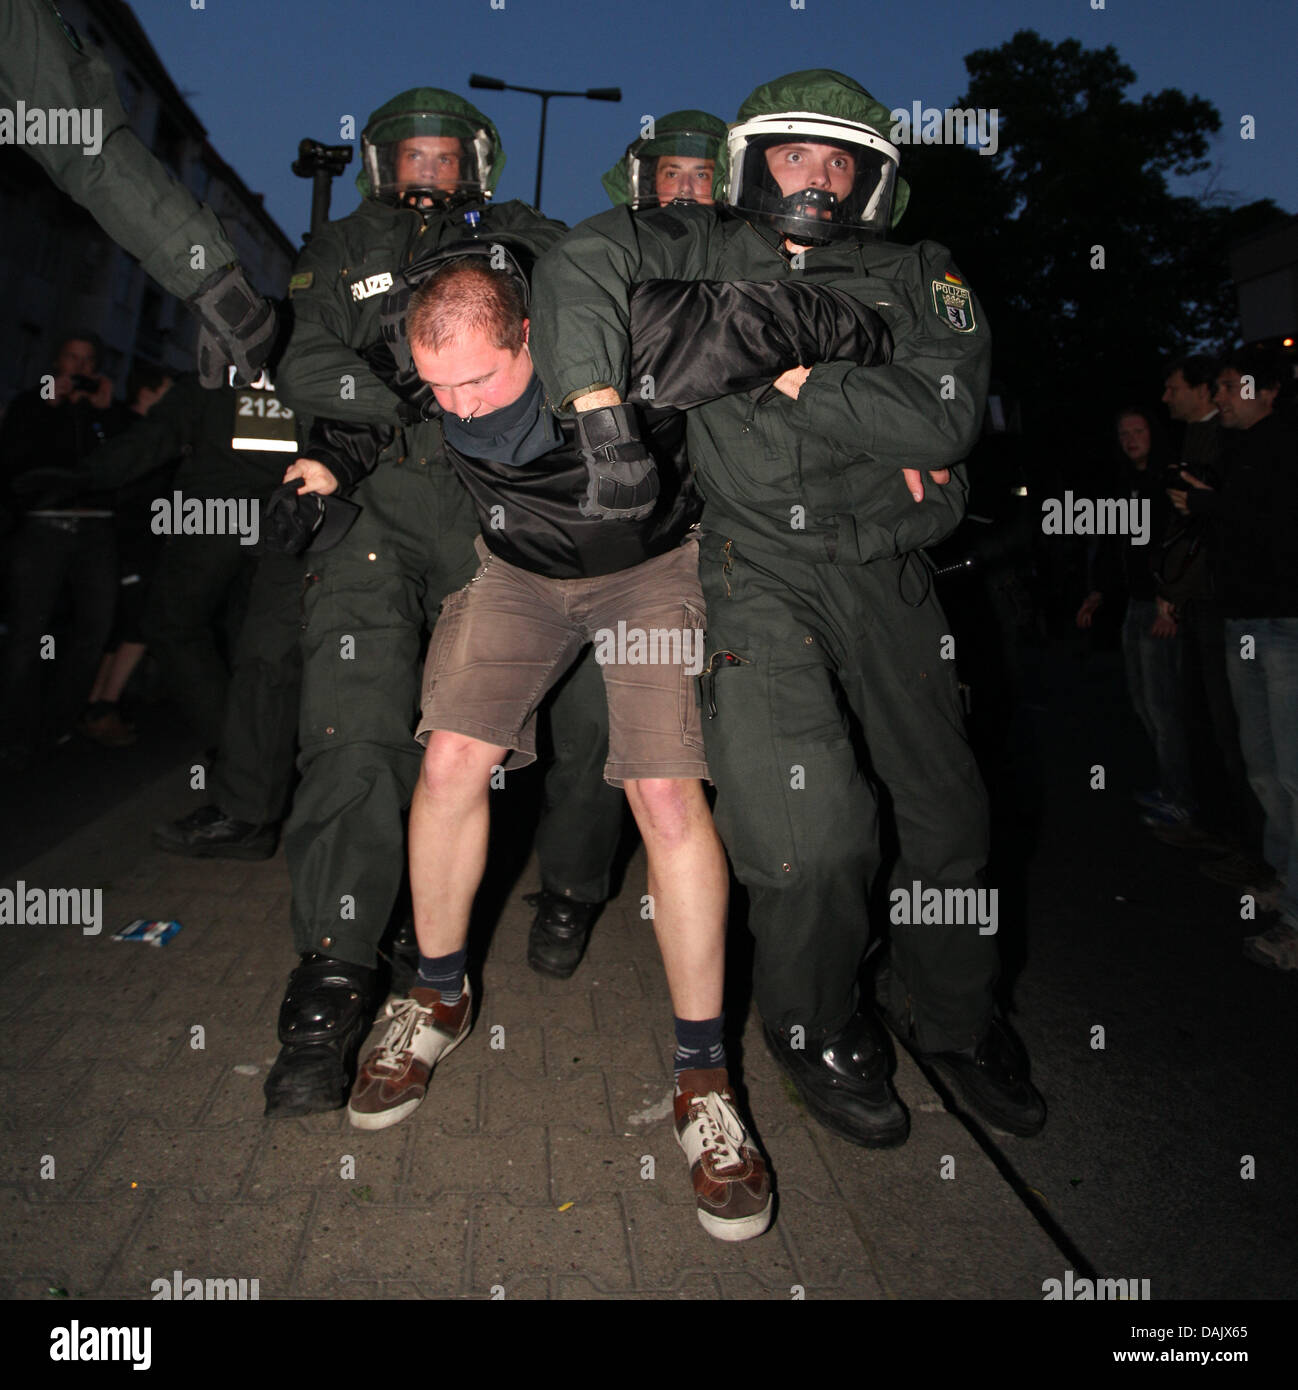 Police officers arrests a demonstrator in Berlin, Germany, 1 May 2011. Photo: Florian Schuh dpa/lbn Stock Photo